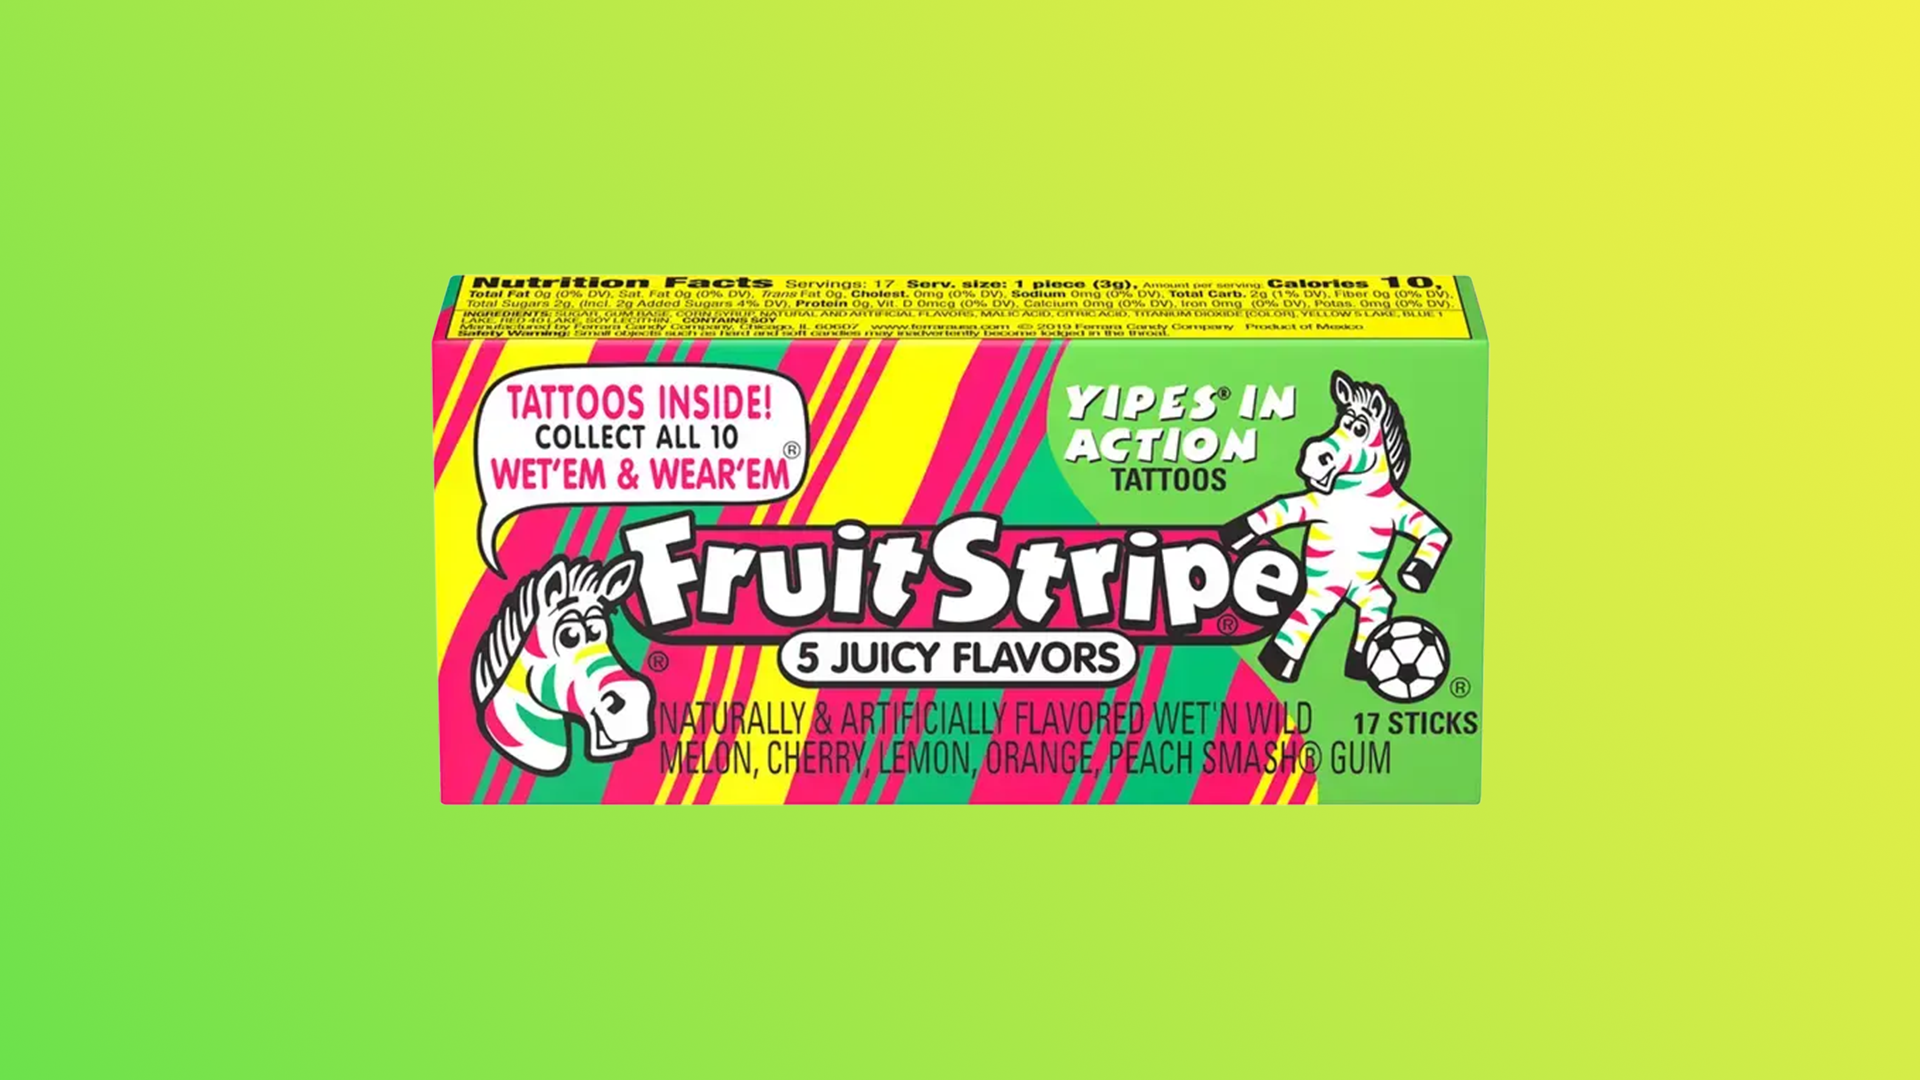 Brand Obituary: Fruit Stripe’s Bubble Bursts and Is Discontinued